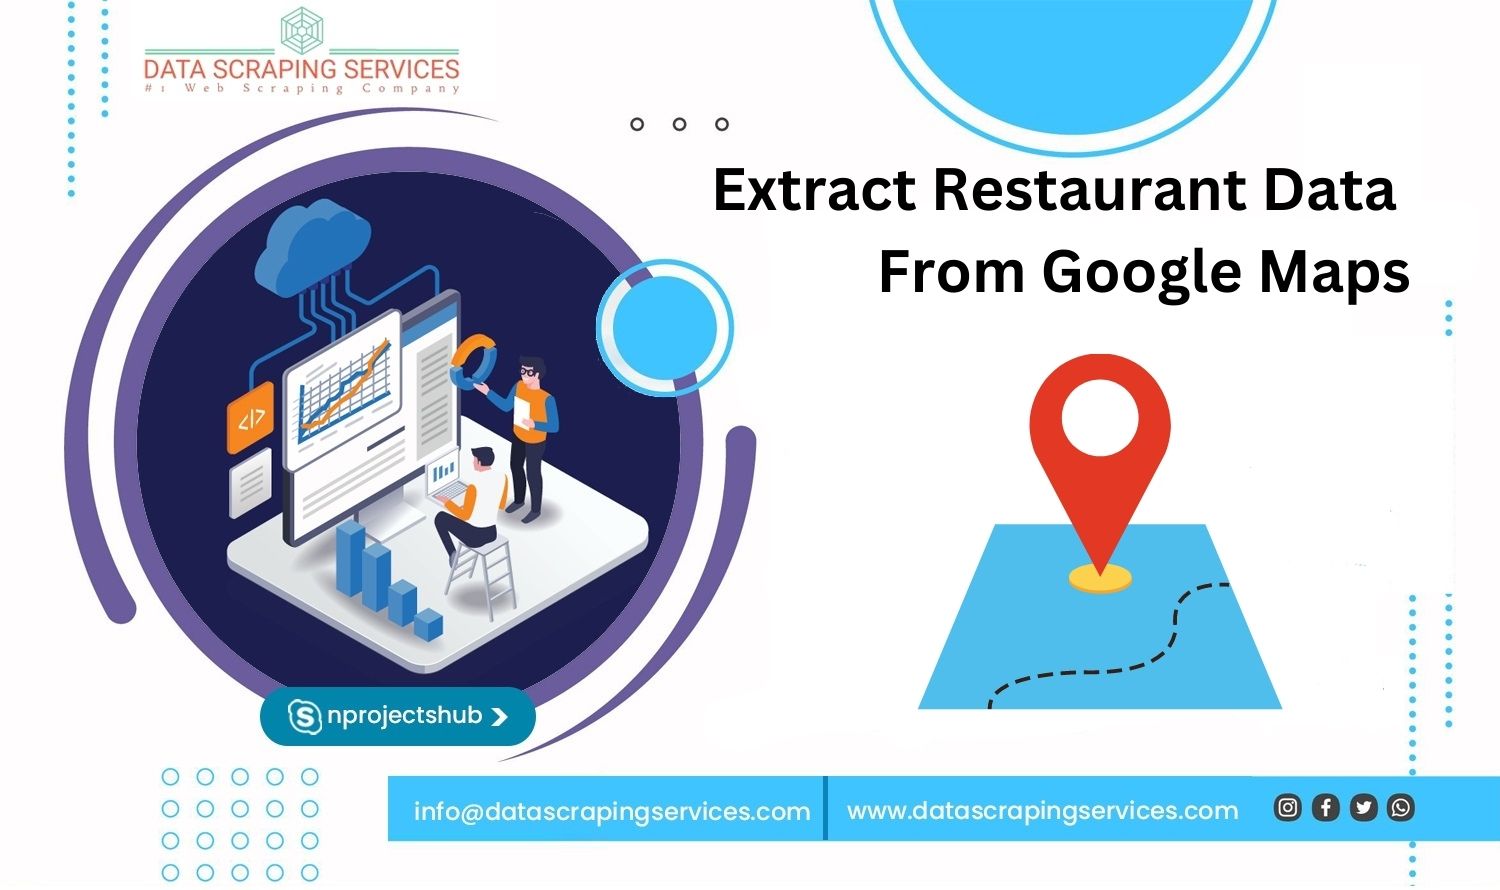 Extract Restaurant Data From Google Maps